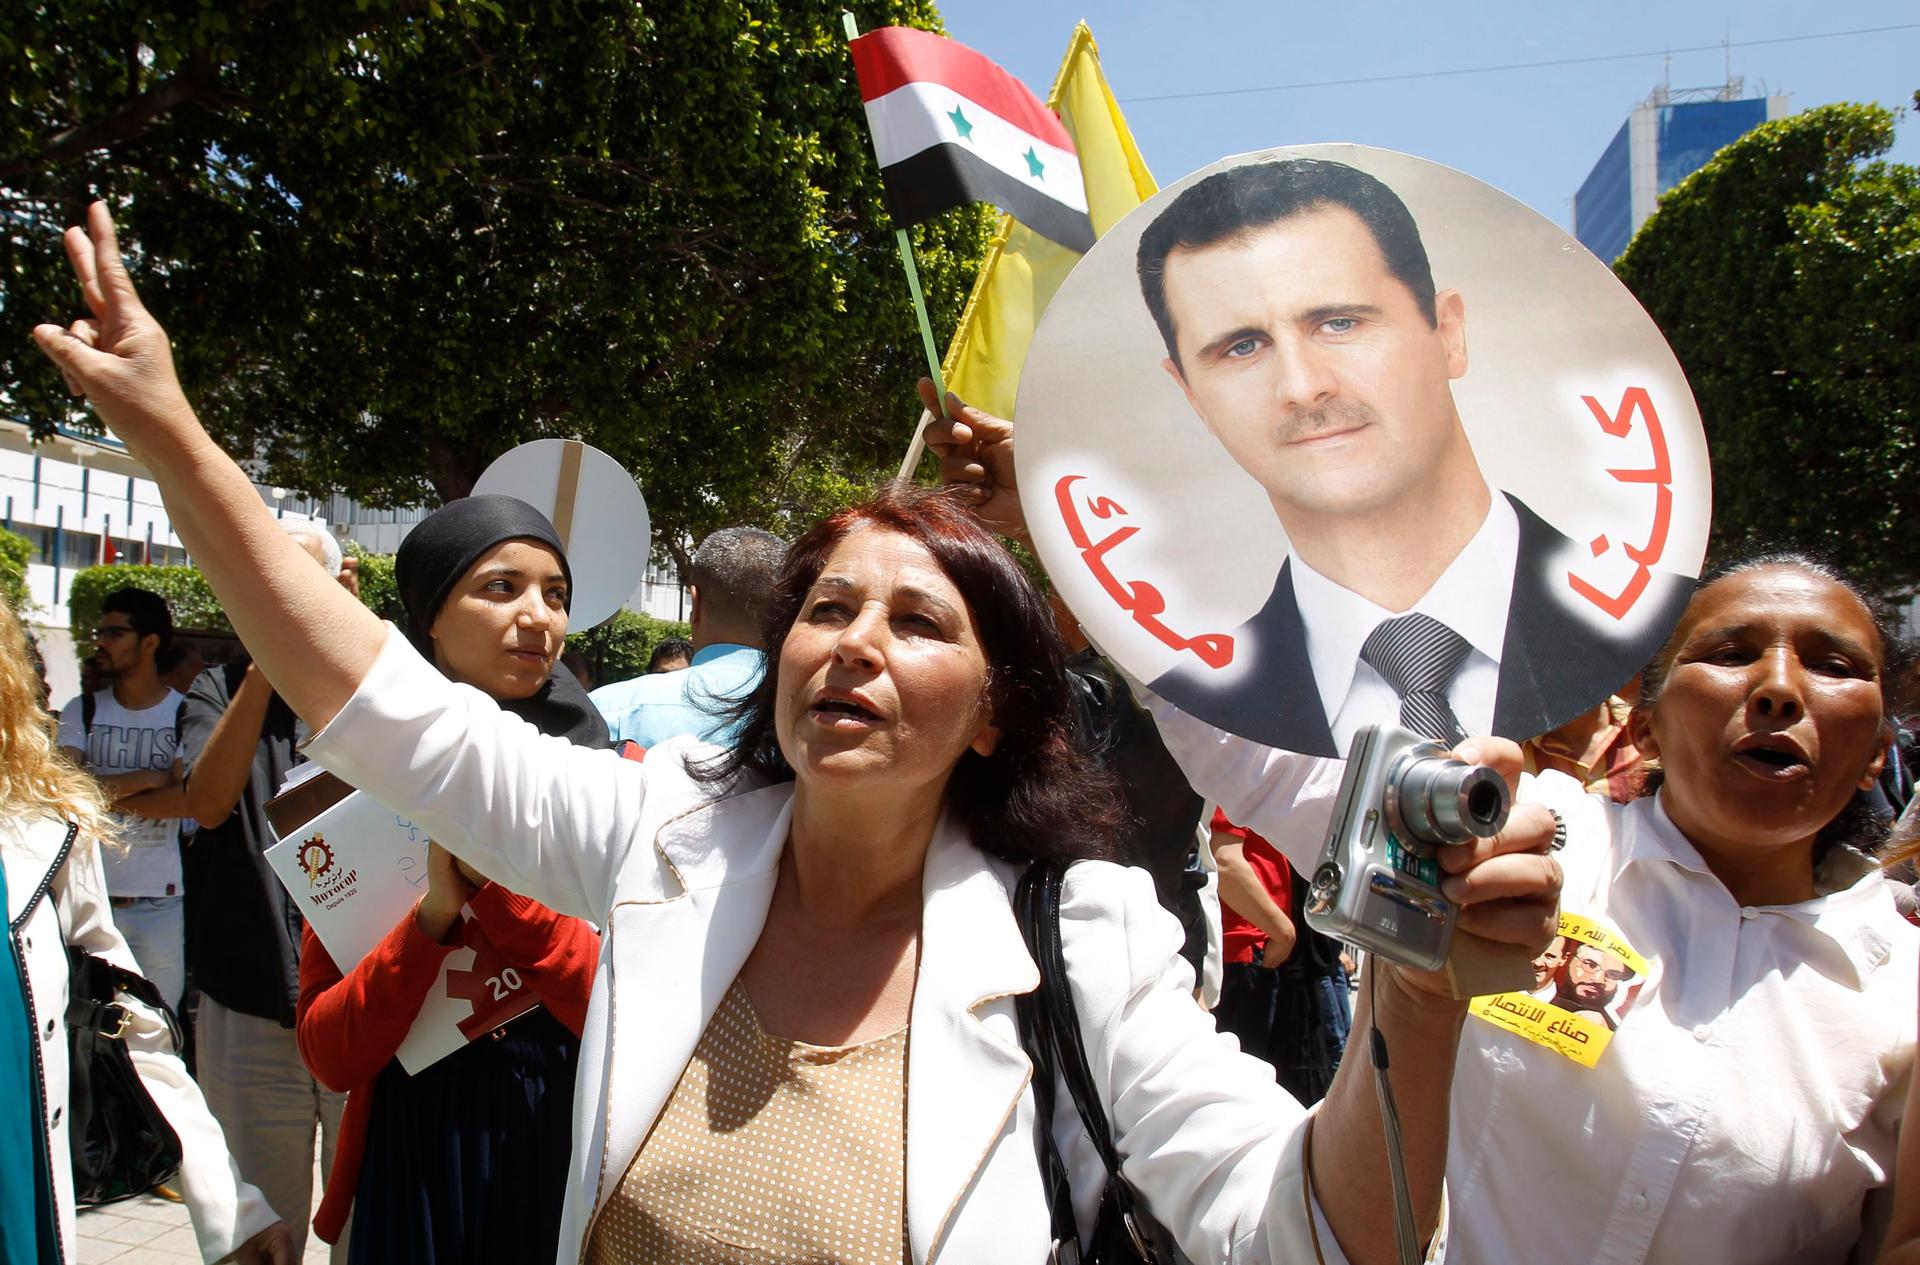 Syrians voted on Tuesday in an election expected to deliver an overwhelming victory for President Bashar al-Assad but which his opponents have dismissed as a charade.